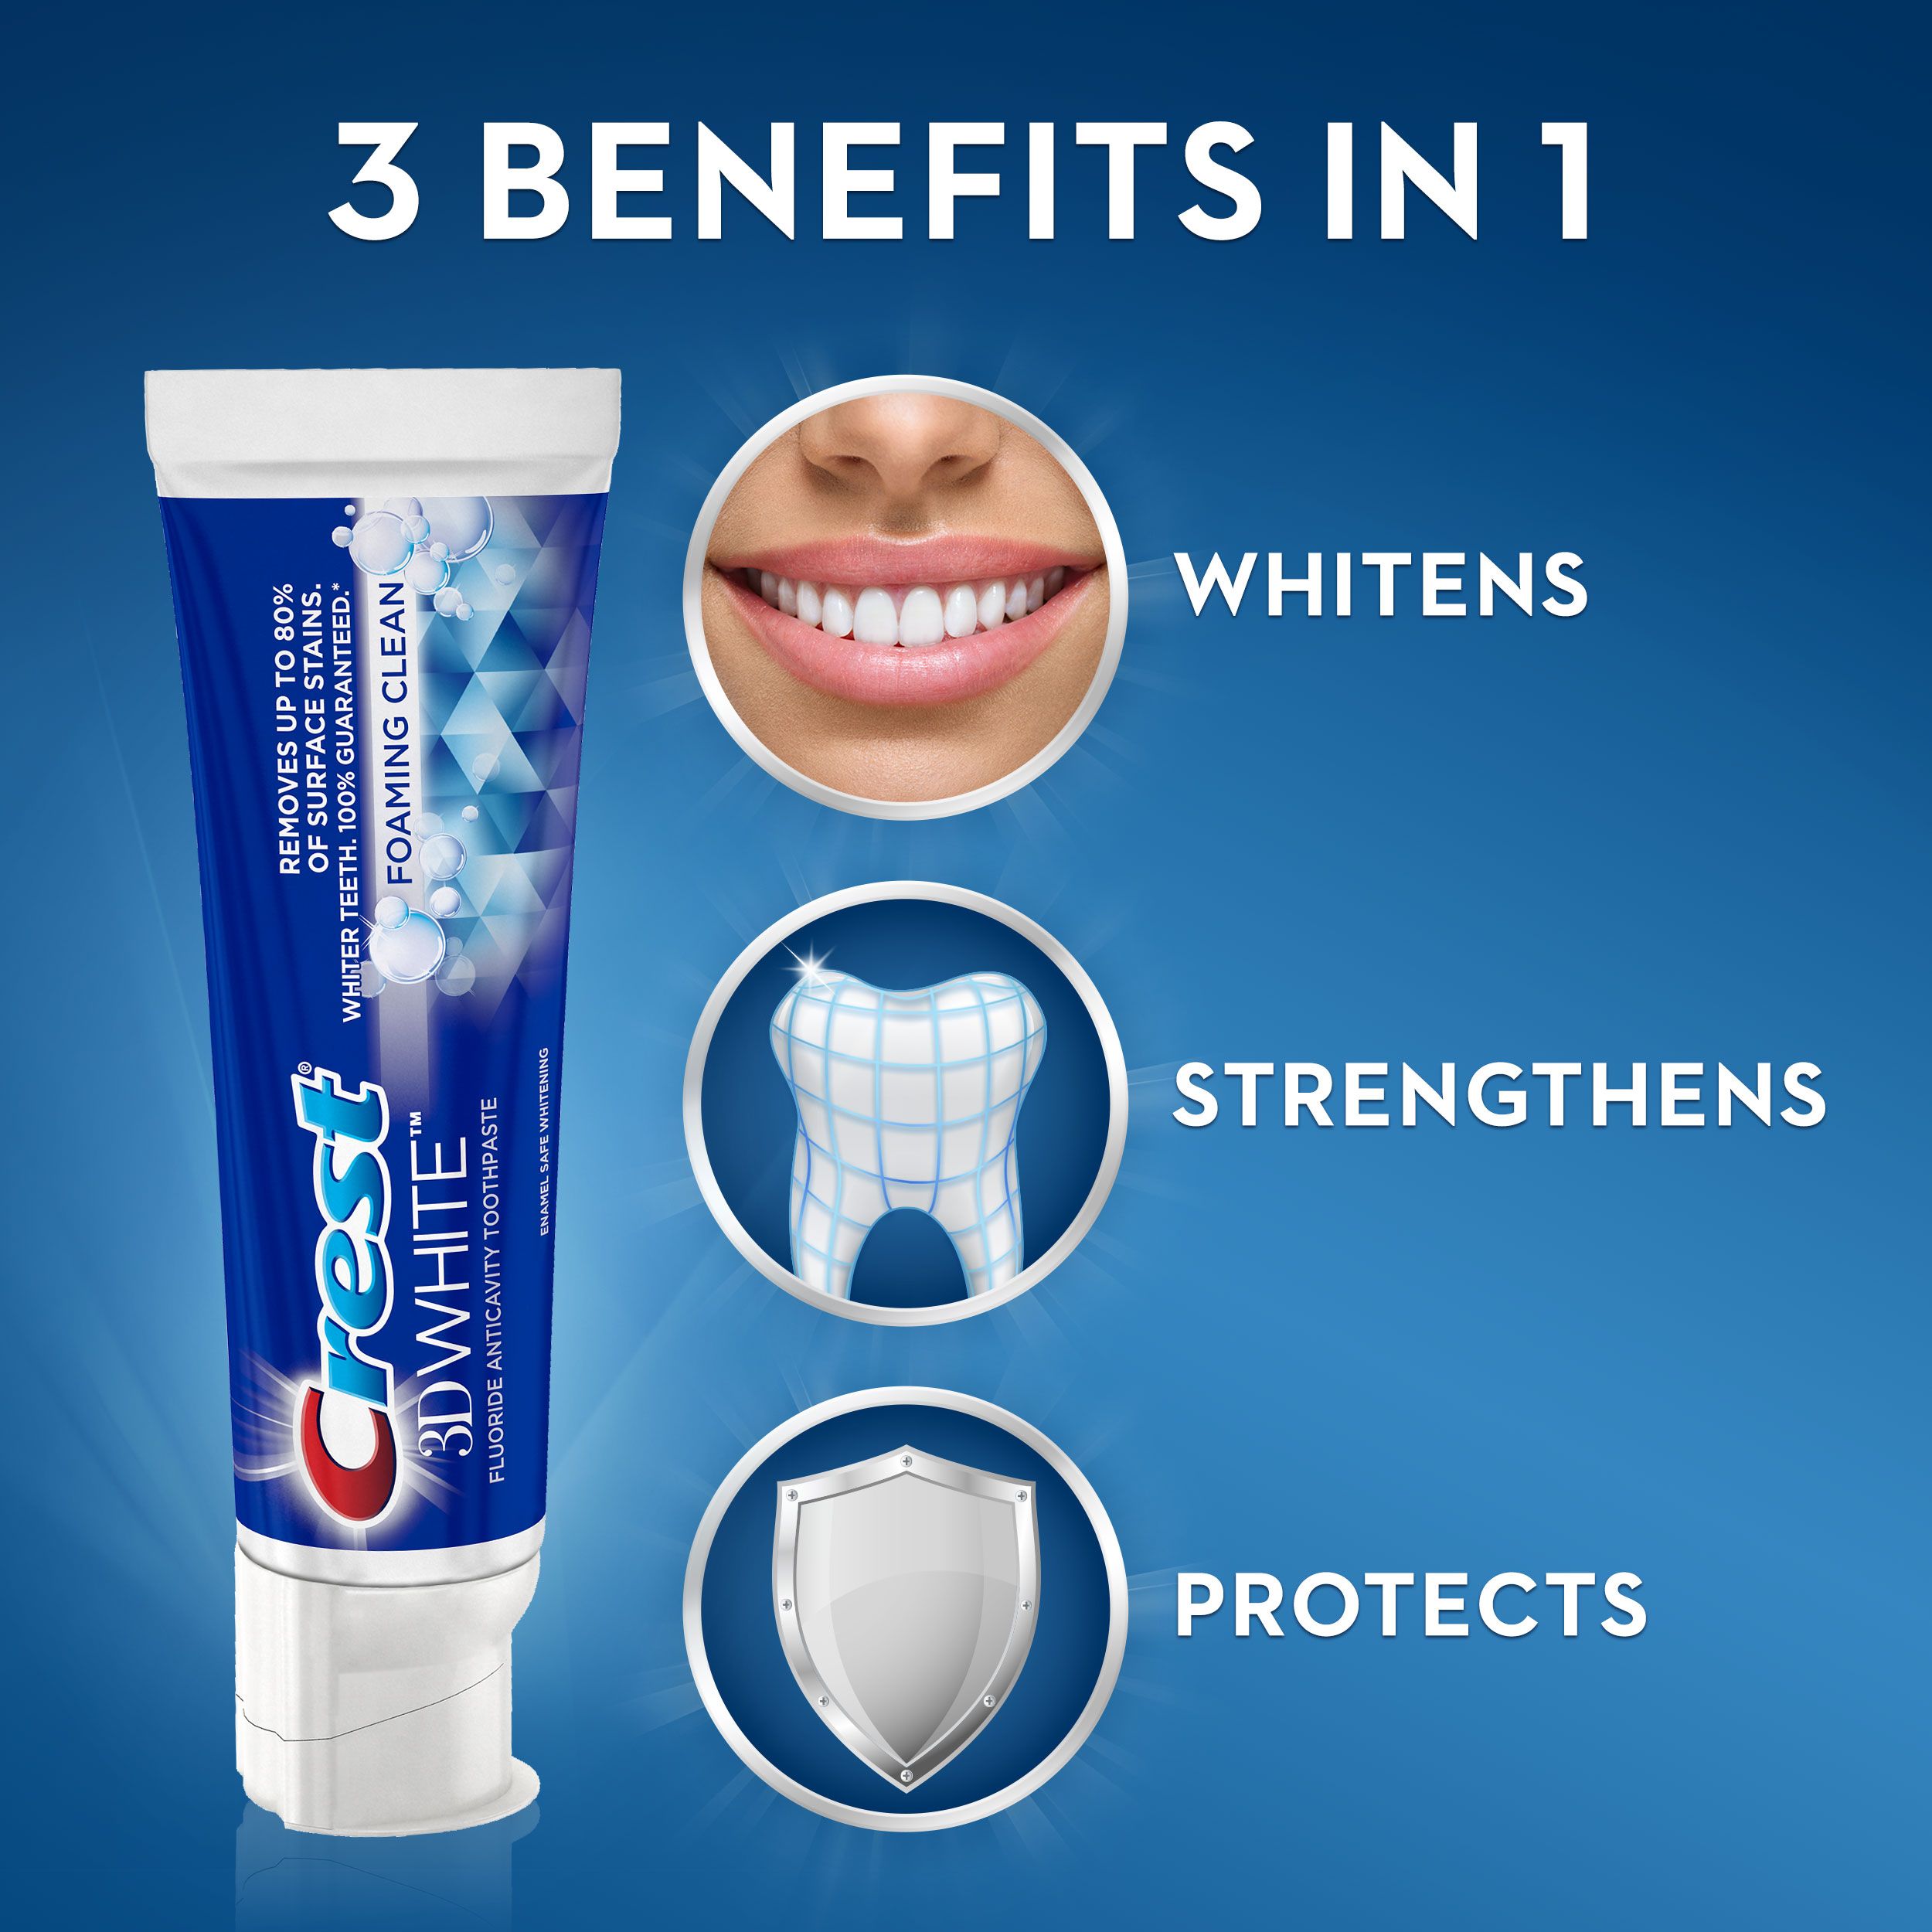 Crest 3D White Foaming Clean Whitening Toothpaste, 4.8 oz, Pack of 2 - image 3 of 9